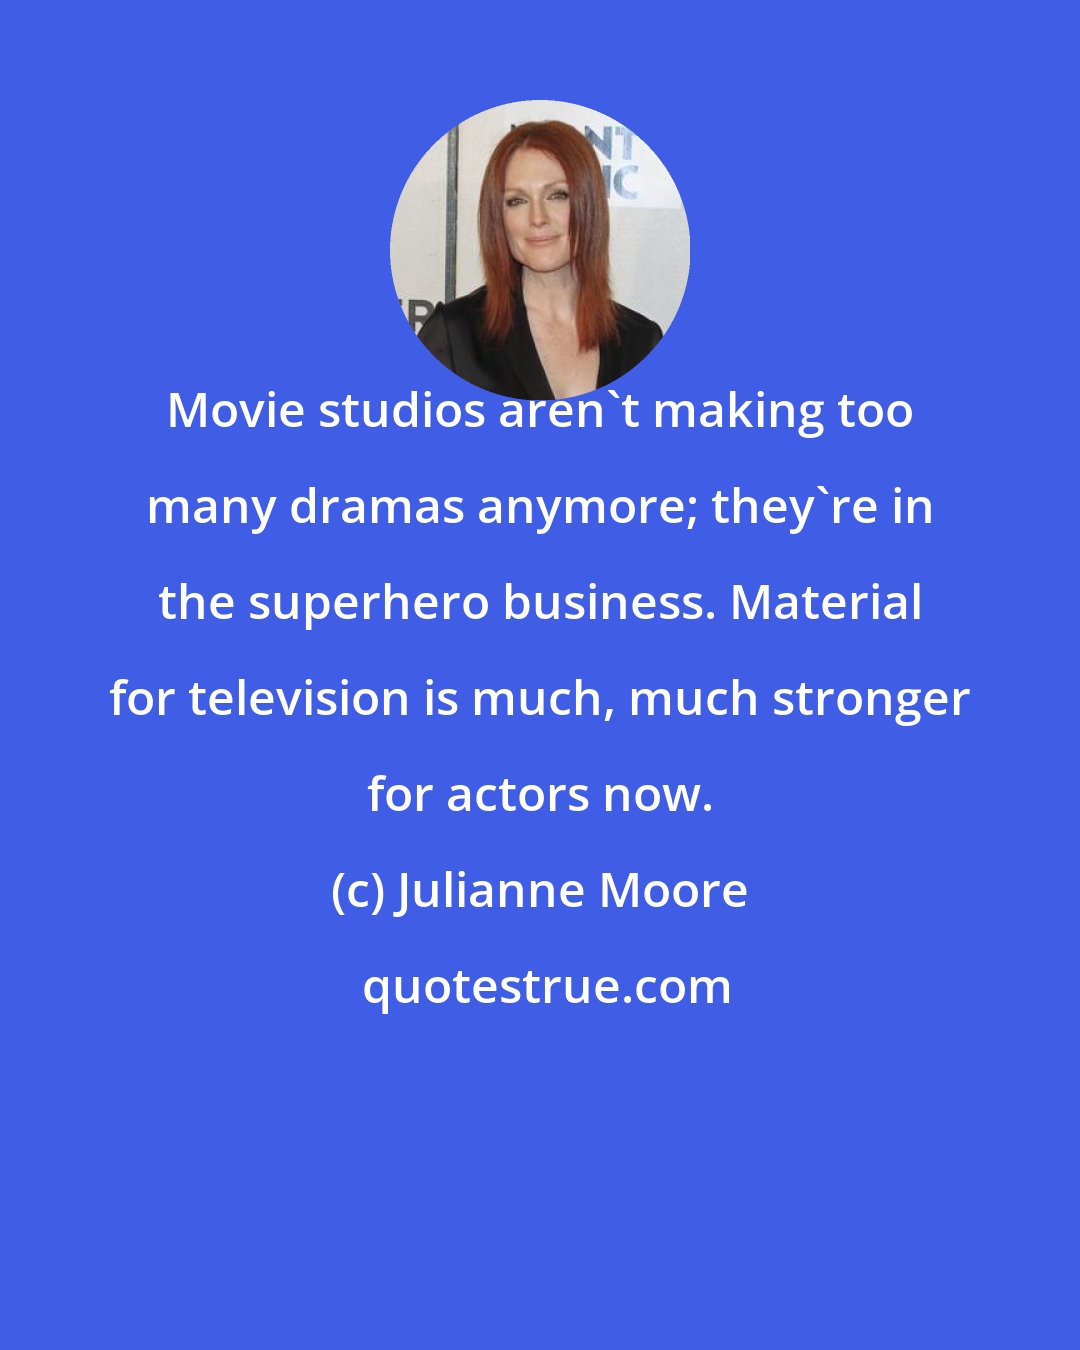 Julianne Moore: Movie studios aren't making too many dramas anymore; they're in the superhero business. Material for television is much, much stronger for actors now.